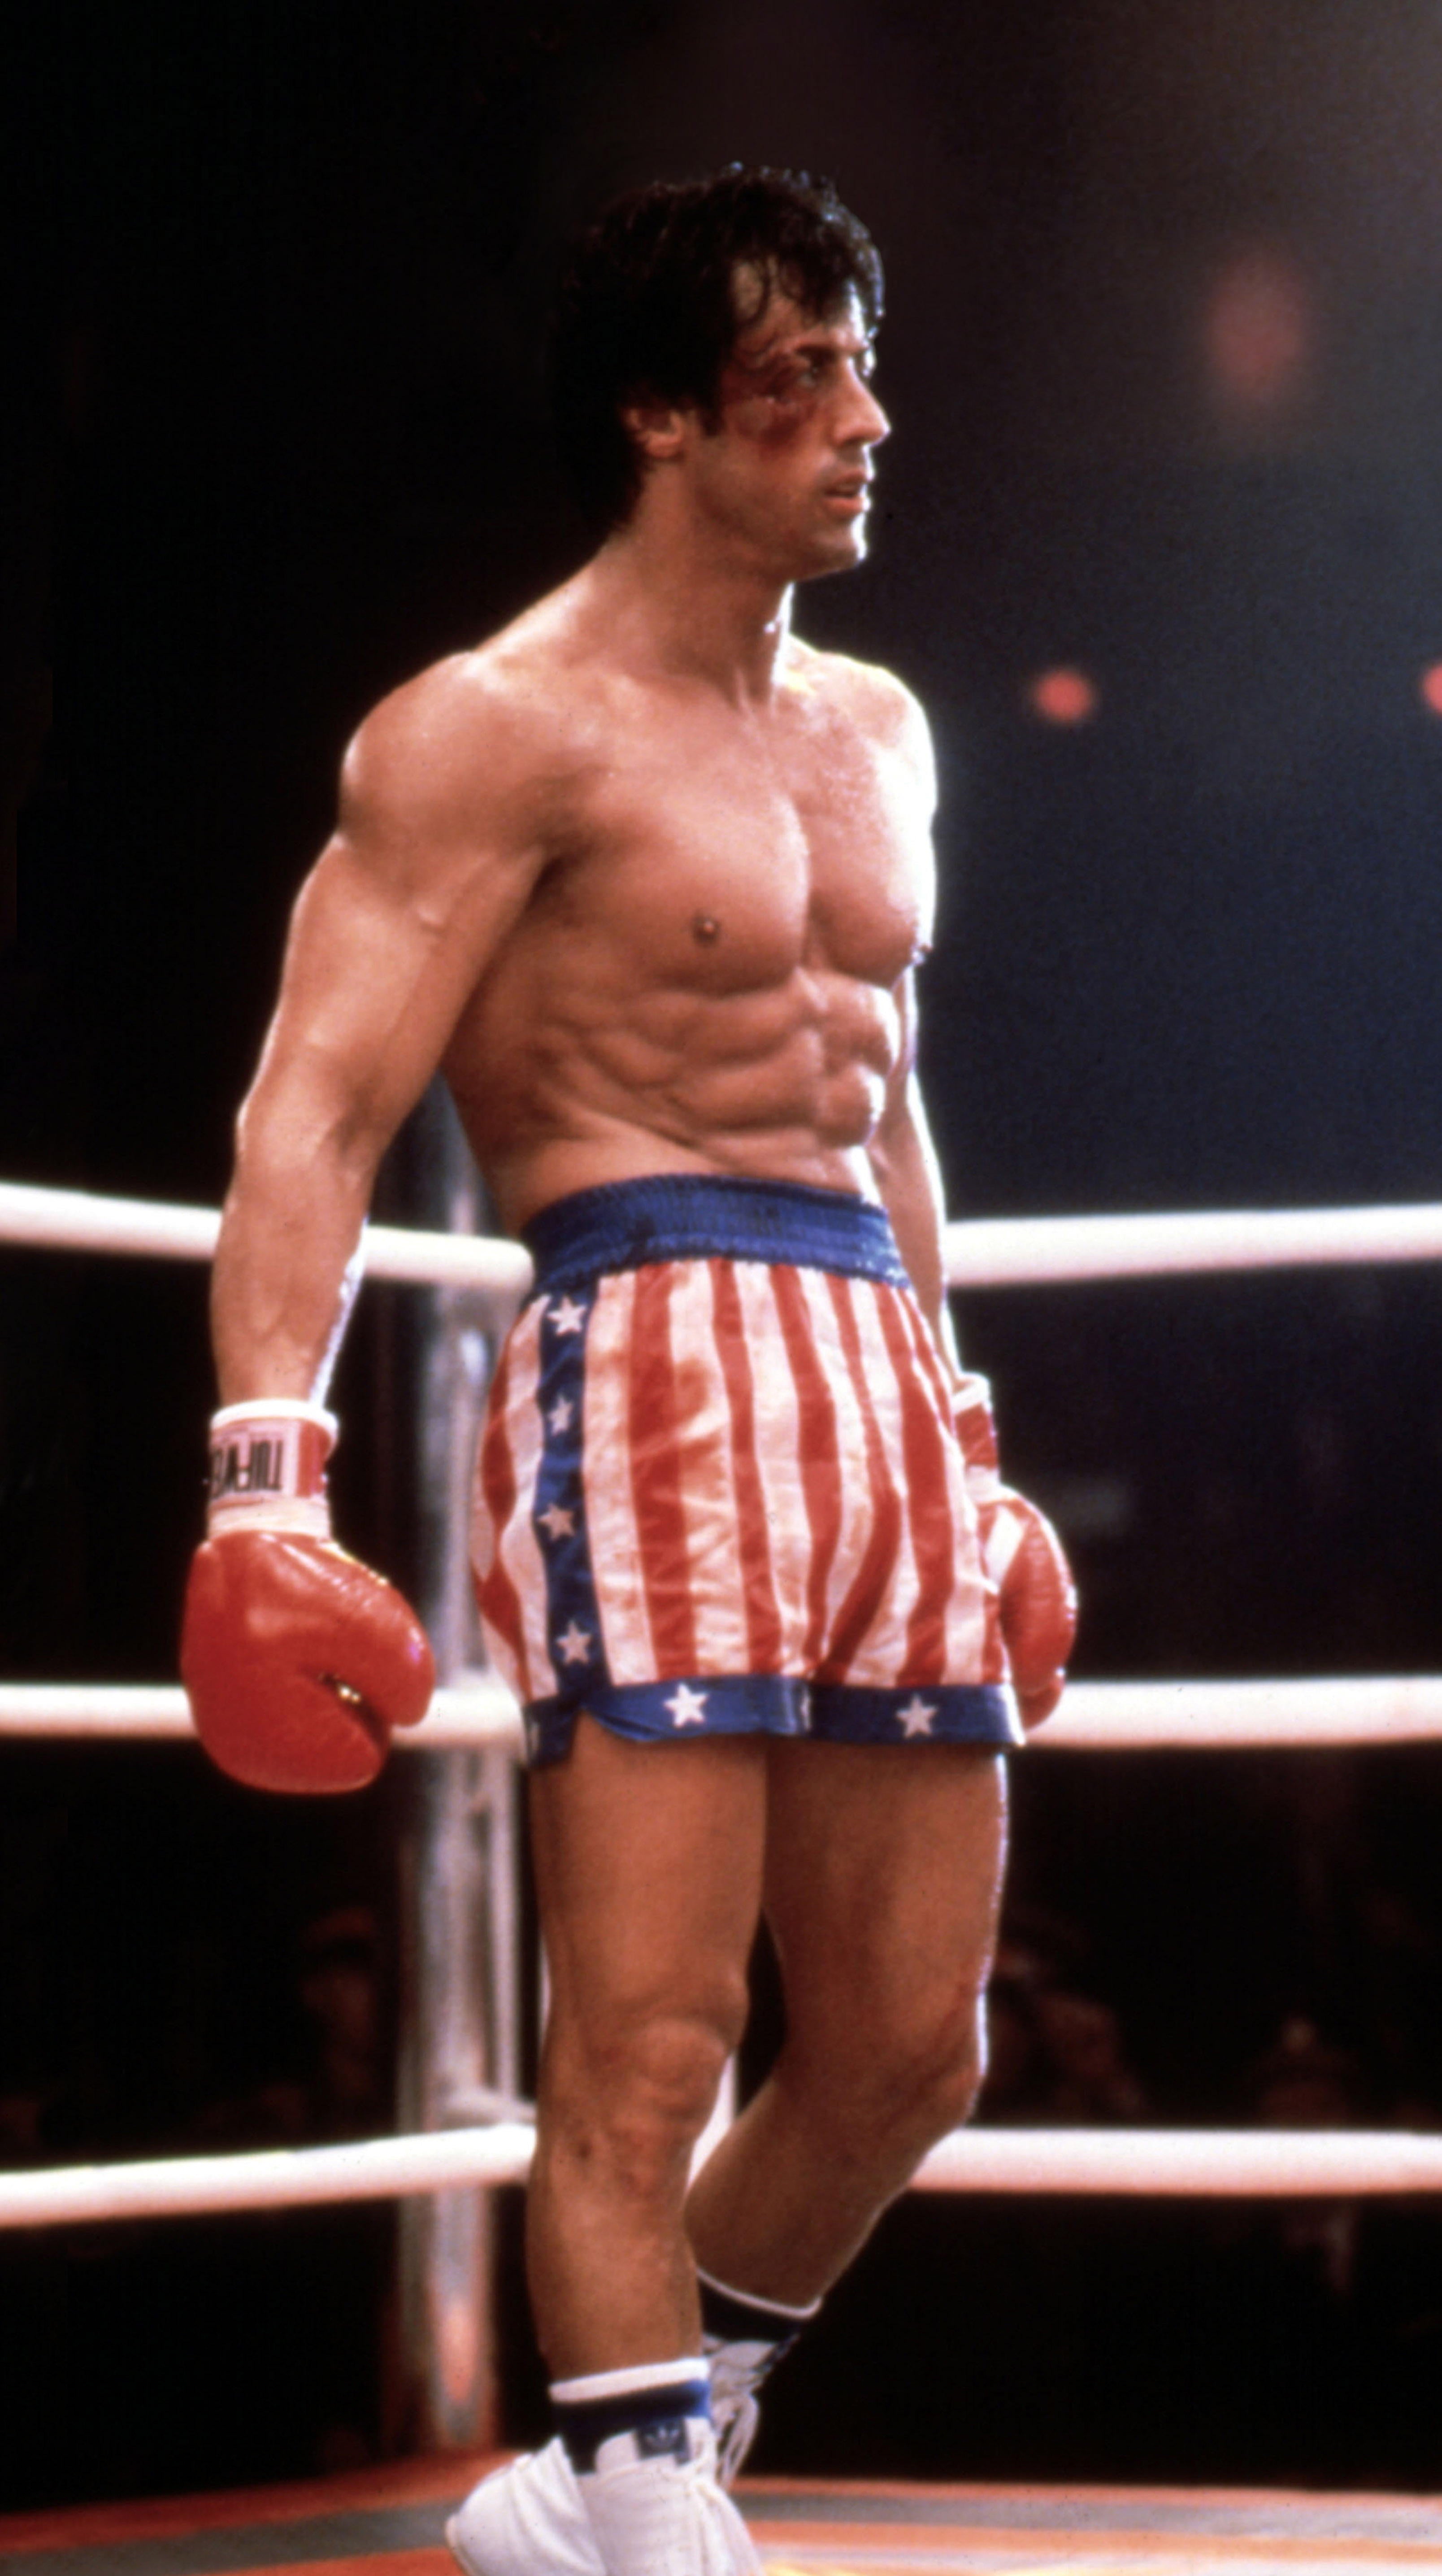 Rocky IV Stars And Stripes Boxing Trunks – Sly Stallone Shop